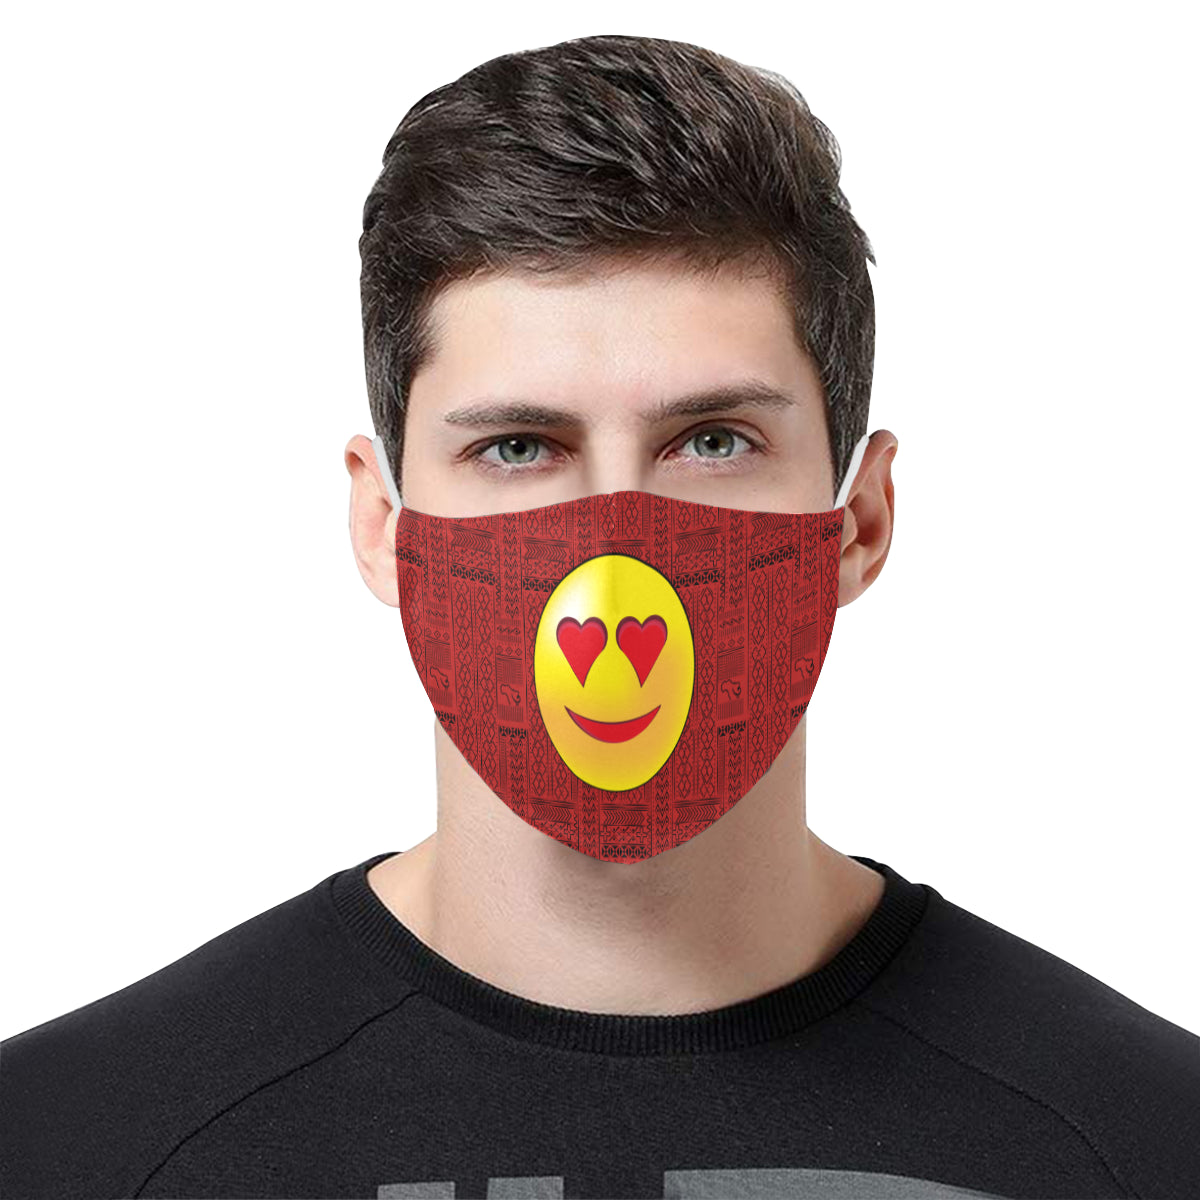 Heart Tribal Print Emoji Cotton Fabric Face Mask with Filter Slot and Adjustable Strap - Non-medical use (2 Filters Included)